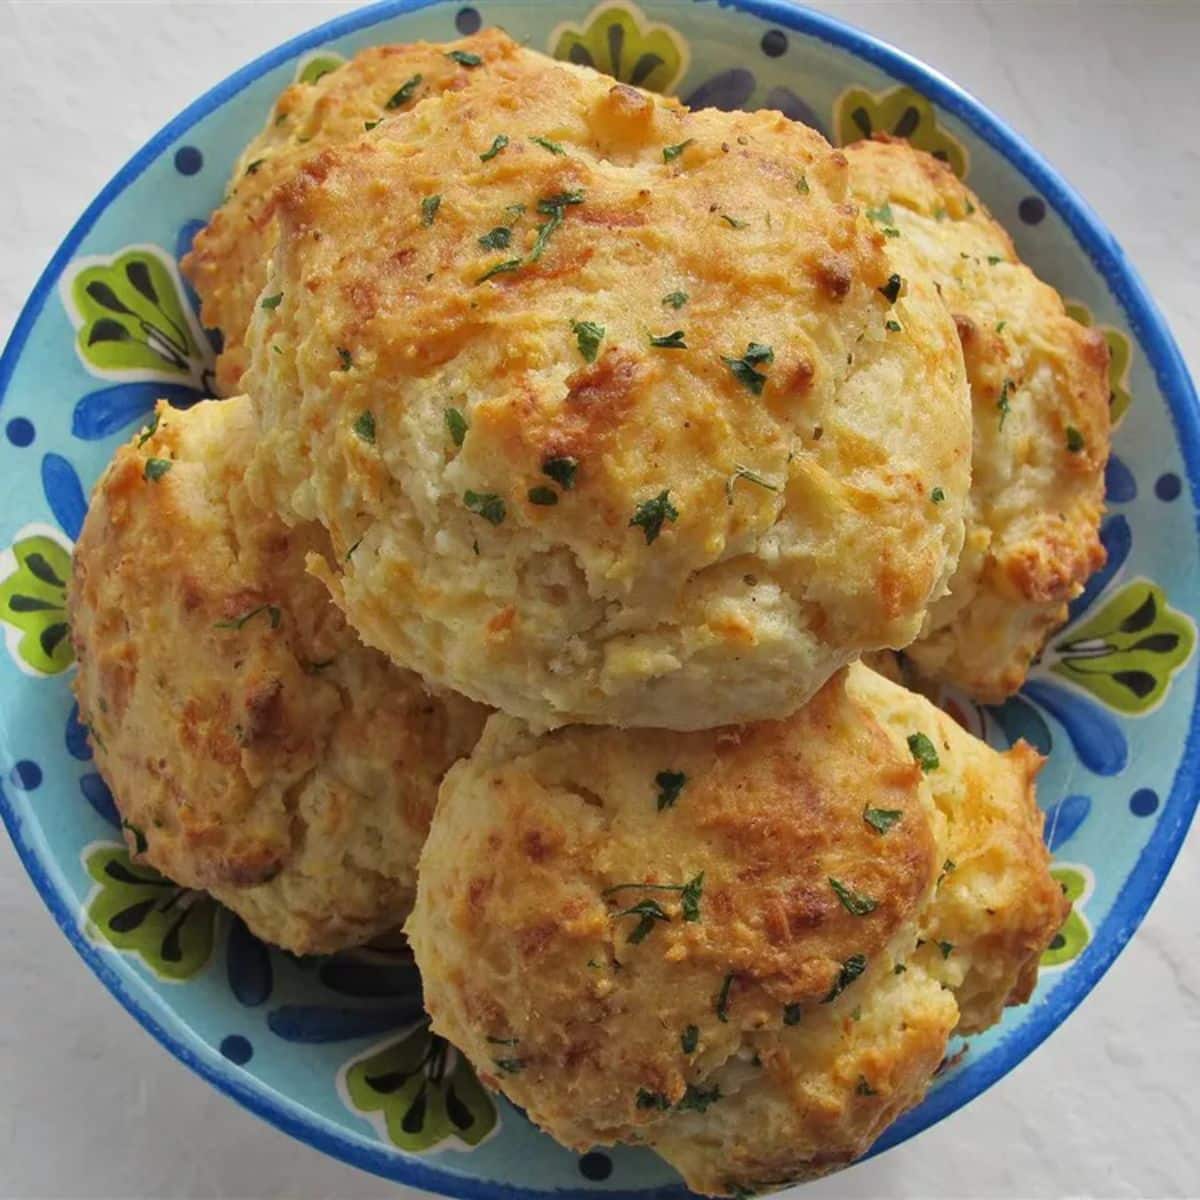 Crispy cheddar biscuits with old bay in a blue bowl.